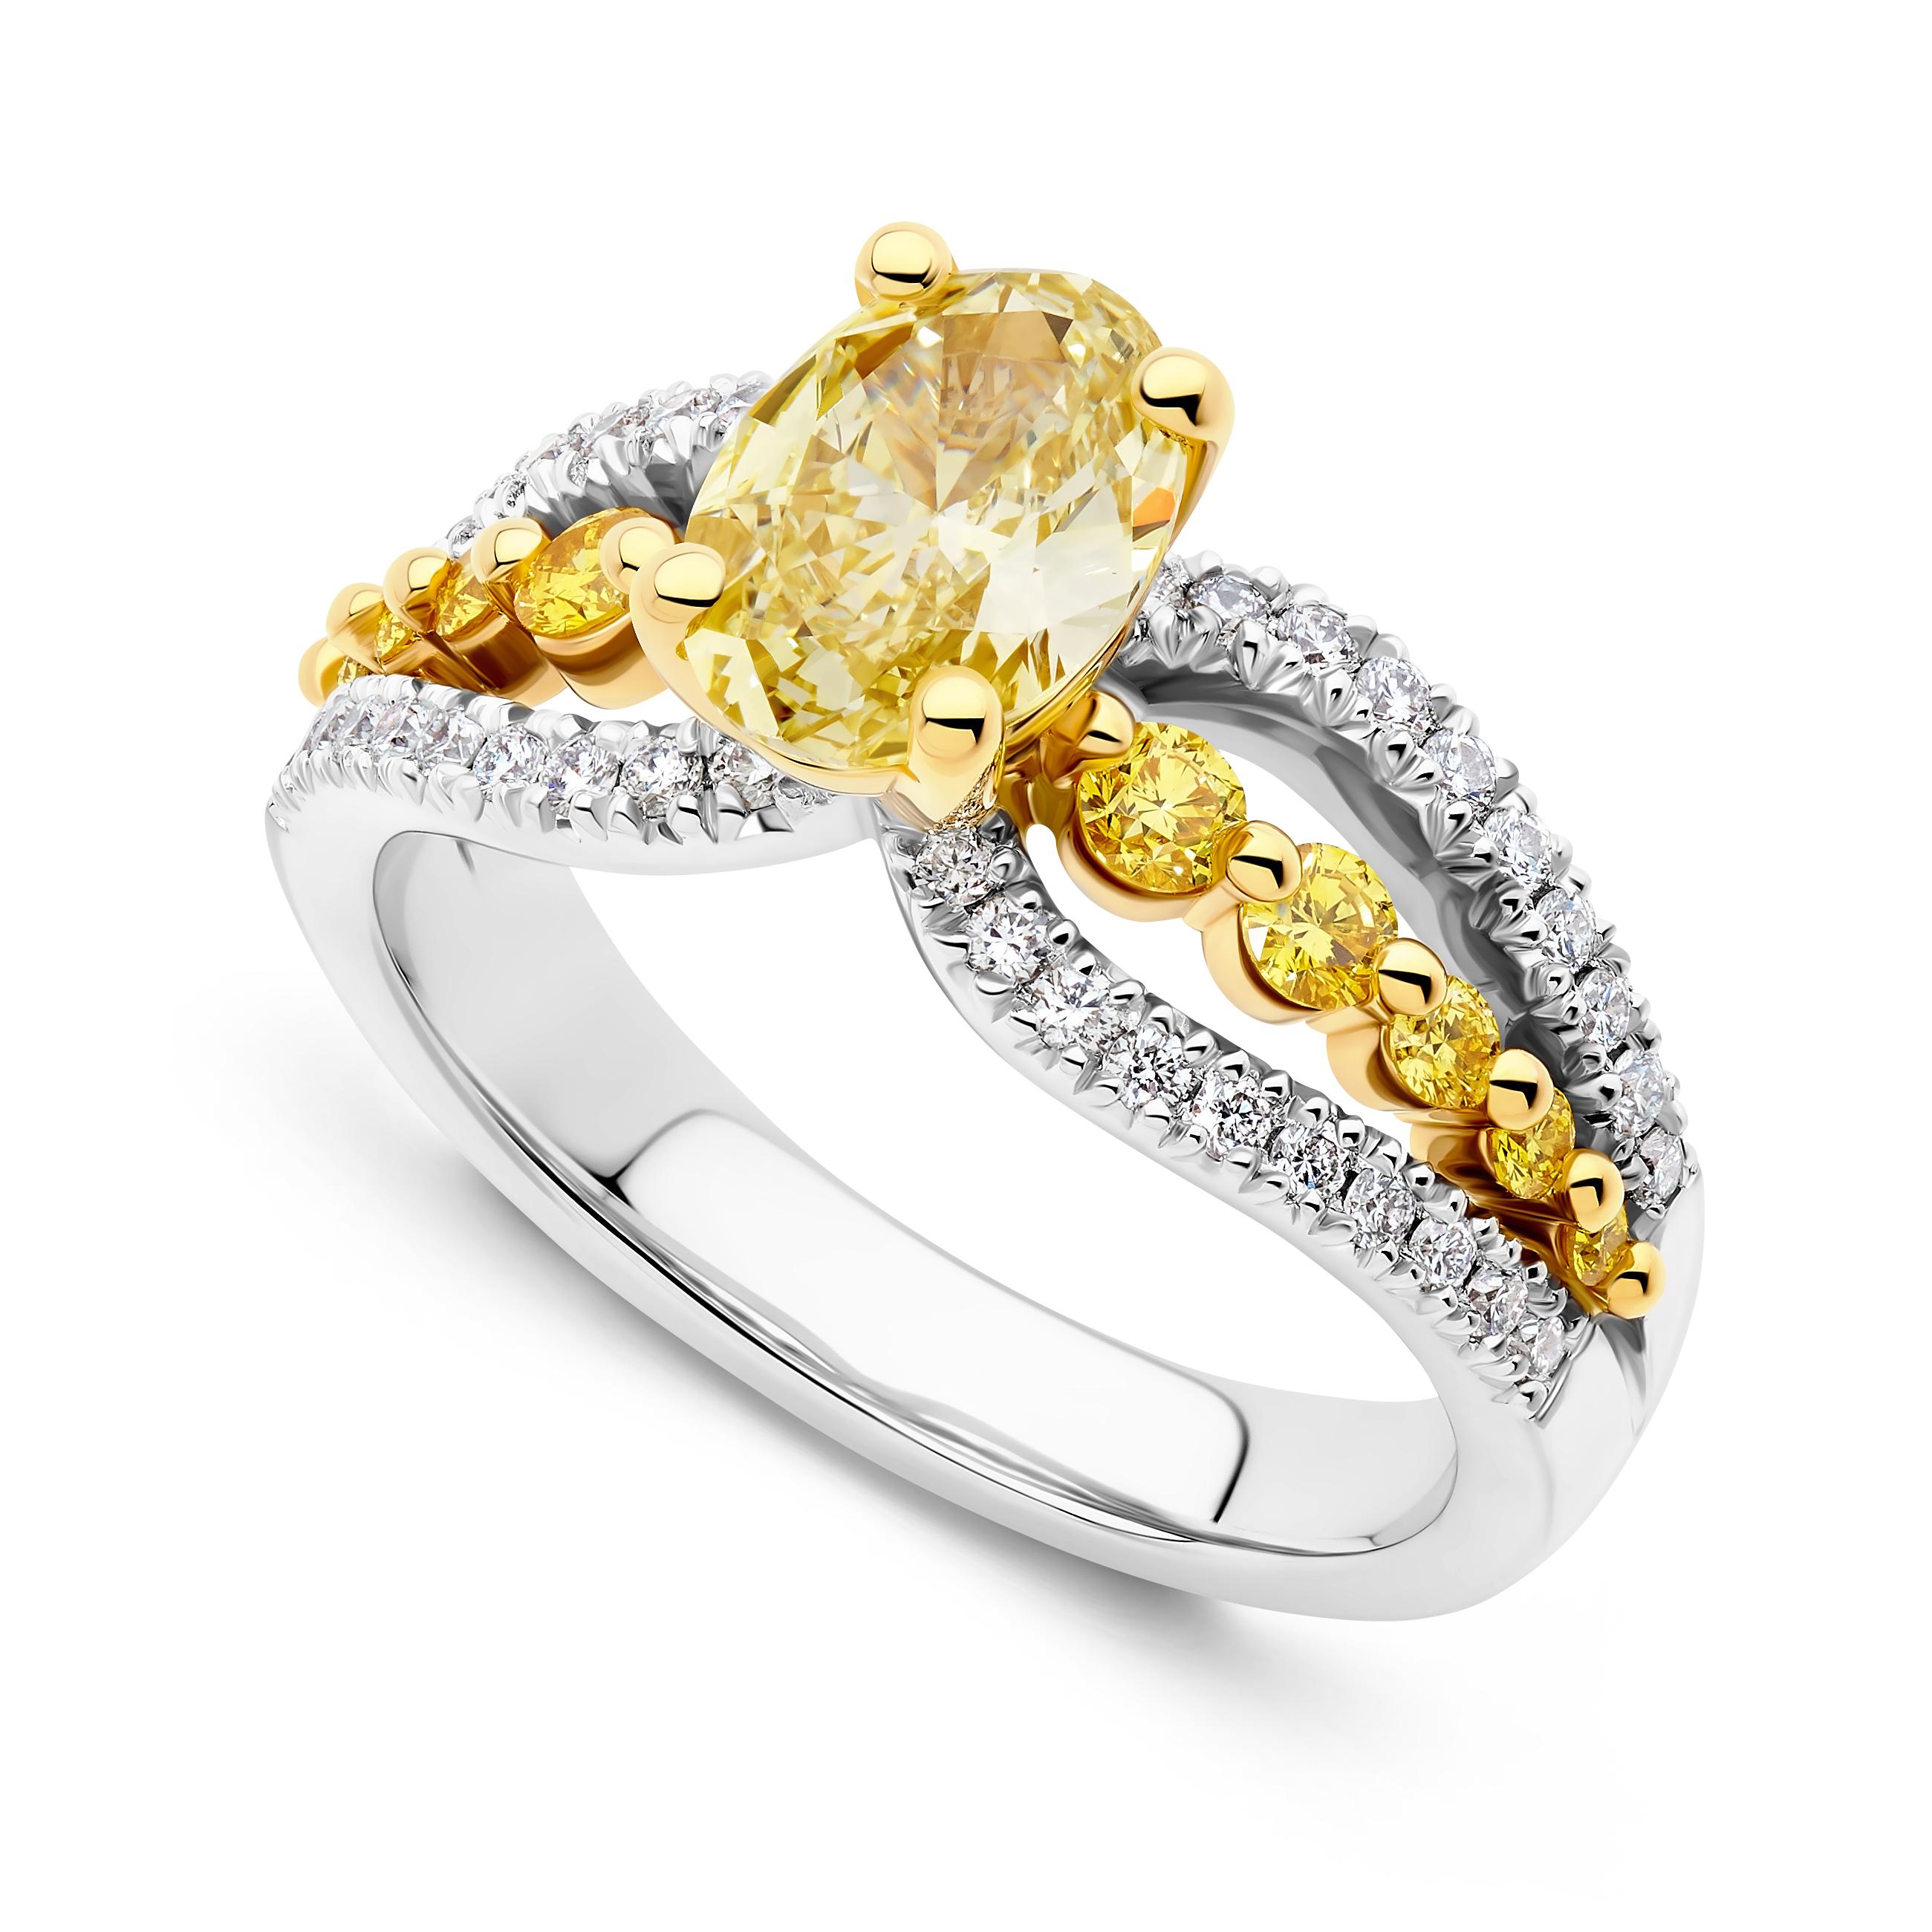 18 karat white gold claw and pave set ring featuring one oval cut GIA certified 1.11cy Fancy Yellow Vs2 clarity diamond and weighing 1.11ct.  Ten round brilliant cut Fancy Vivid / Fancy Intense diamonds of VS clarity totalling 0.305ct.  Thirty round